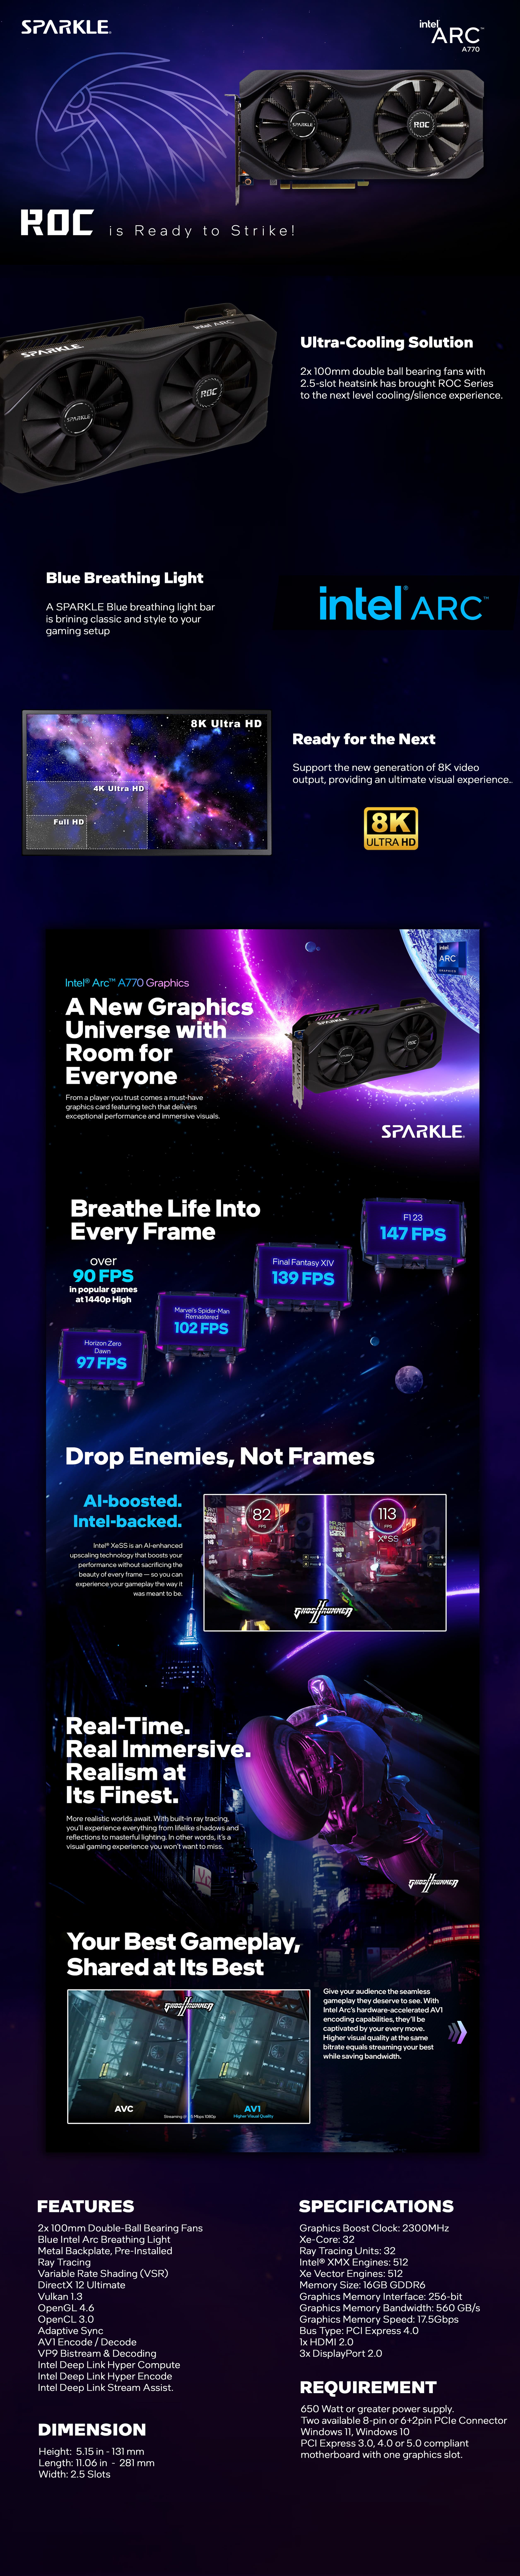 A large marketing image providing additional information about the product SPARKLE Intel Arc A770 ROC OC 16GB GDDR6 - Black - Additional alt info not provided